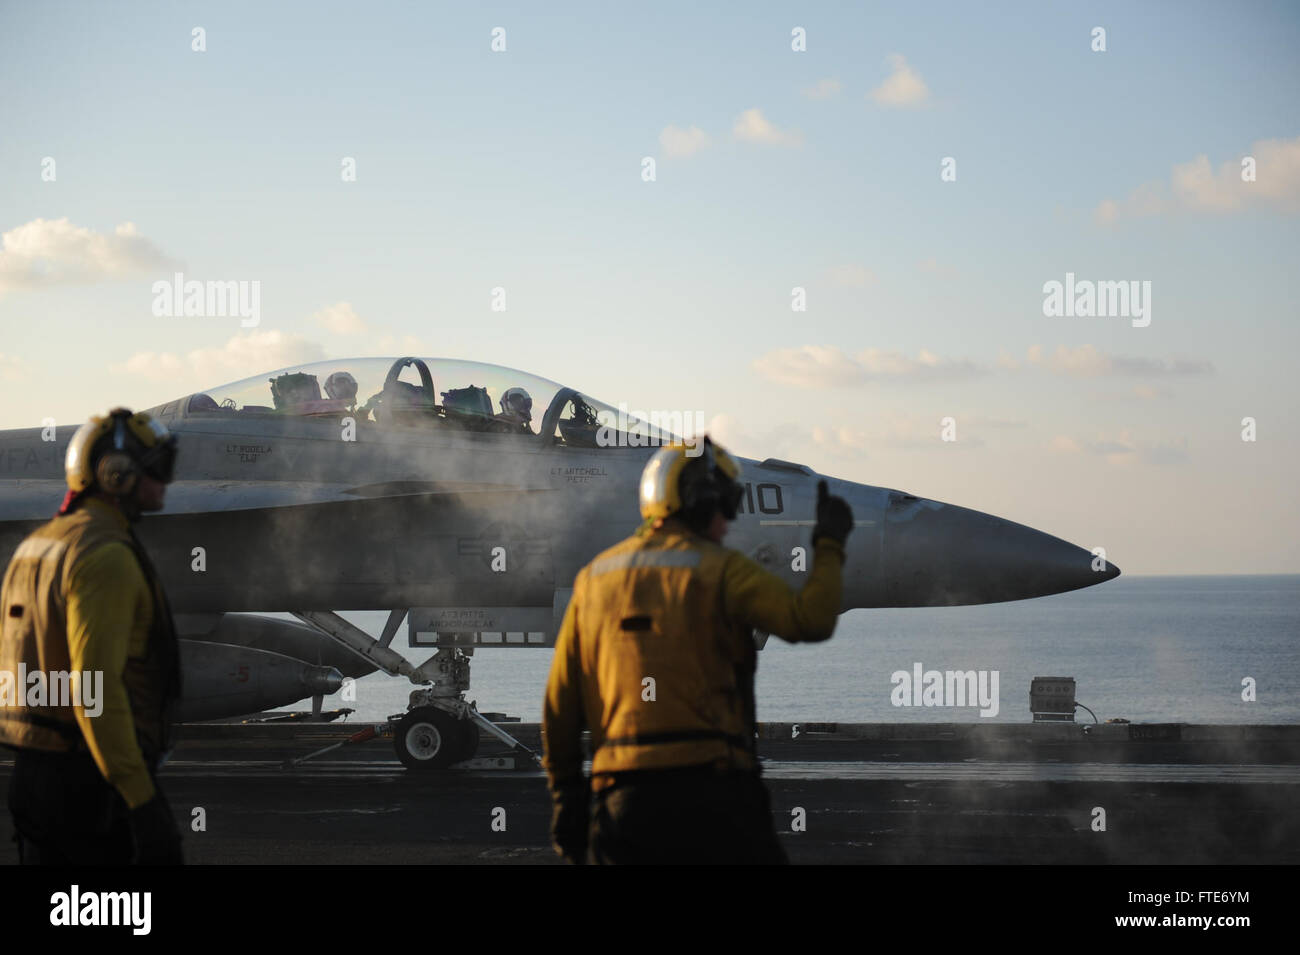 Sailors prepare an F/A-18F Super Hornet, assigned to the “Black Knights” of Strike Fighter Squadron (VFA) 154, for launch from the flight deck of the aircraft carrier USS Nimitz (CVN 68). Nimitz is deployed supporting maritime security operations and theater security cooperation efforts in the U.S. 6th Fleet area of operations. (U.S. Navy photo by Mass Communication Specialist Seaman Siobhana R. McEwen/ Released) Stock Photo